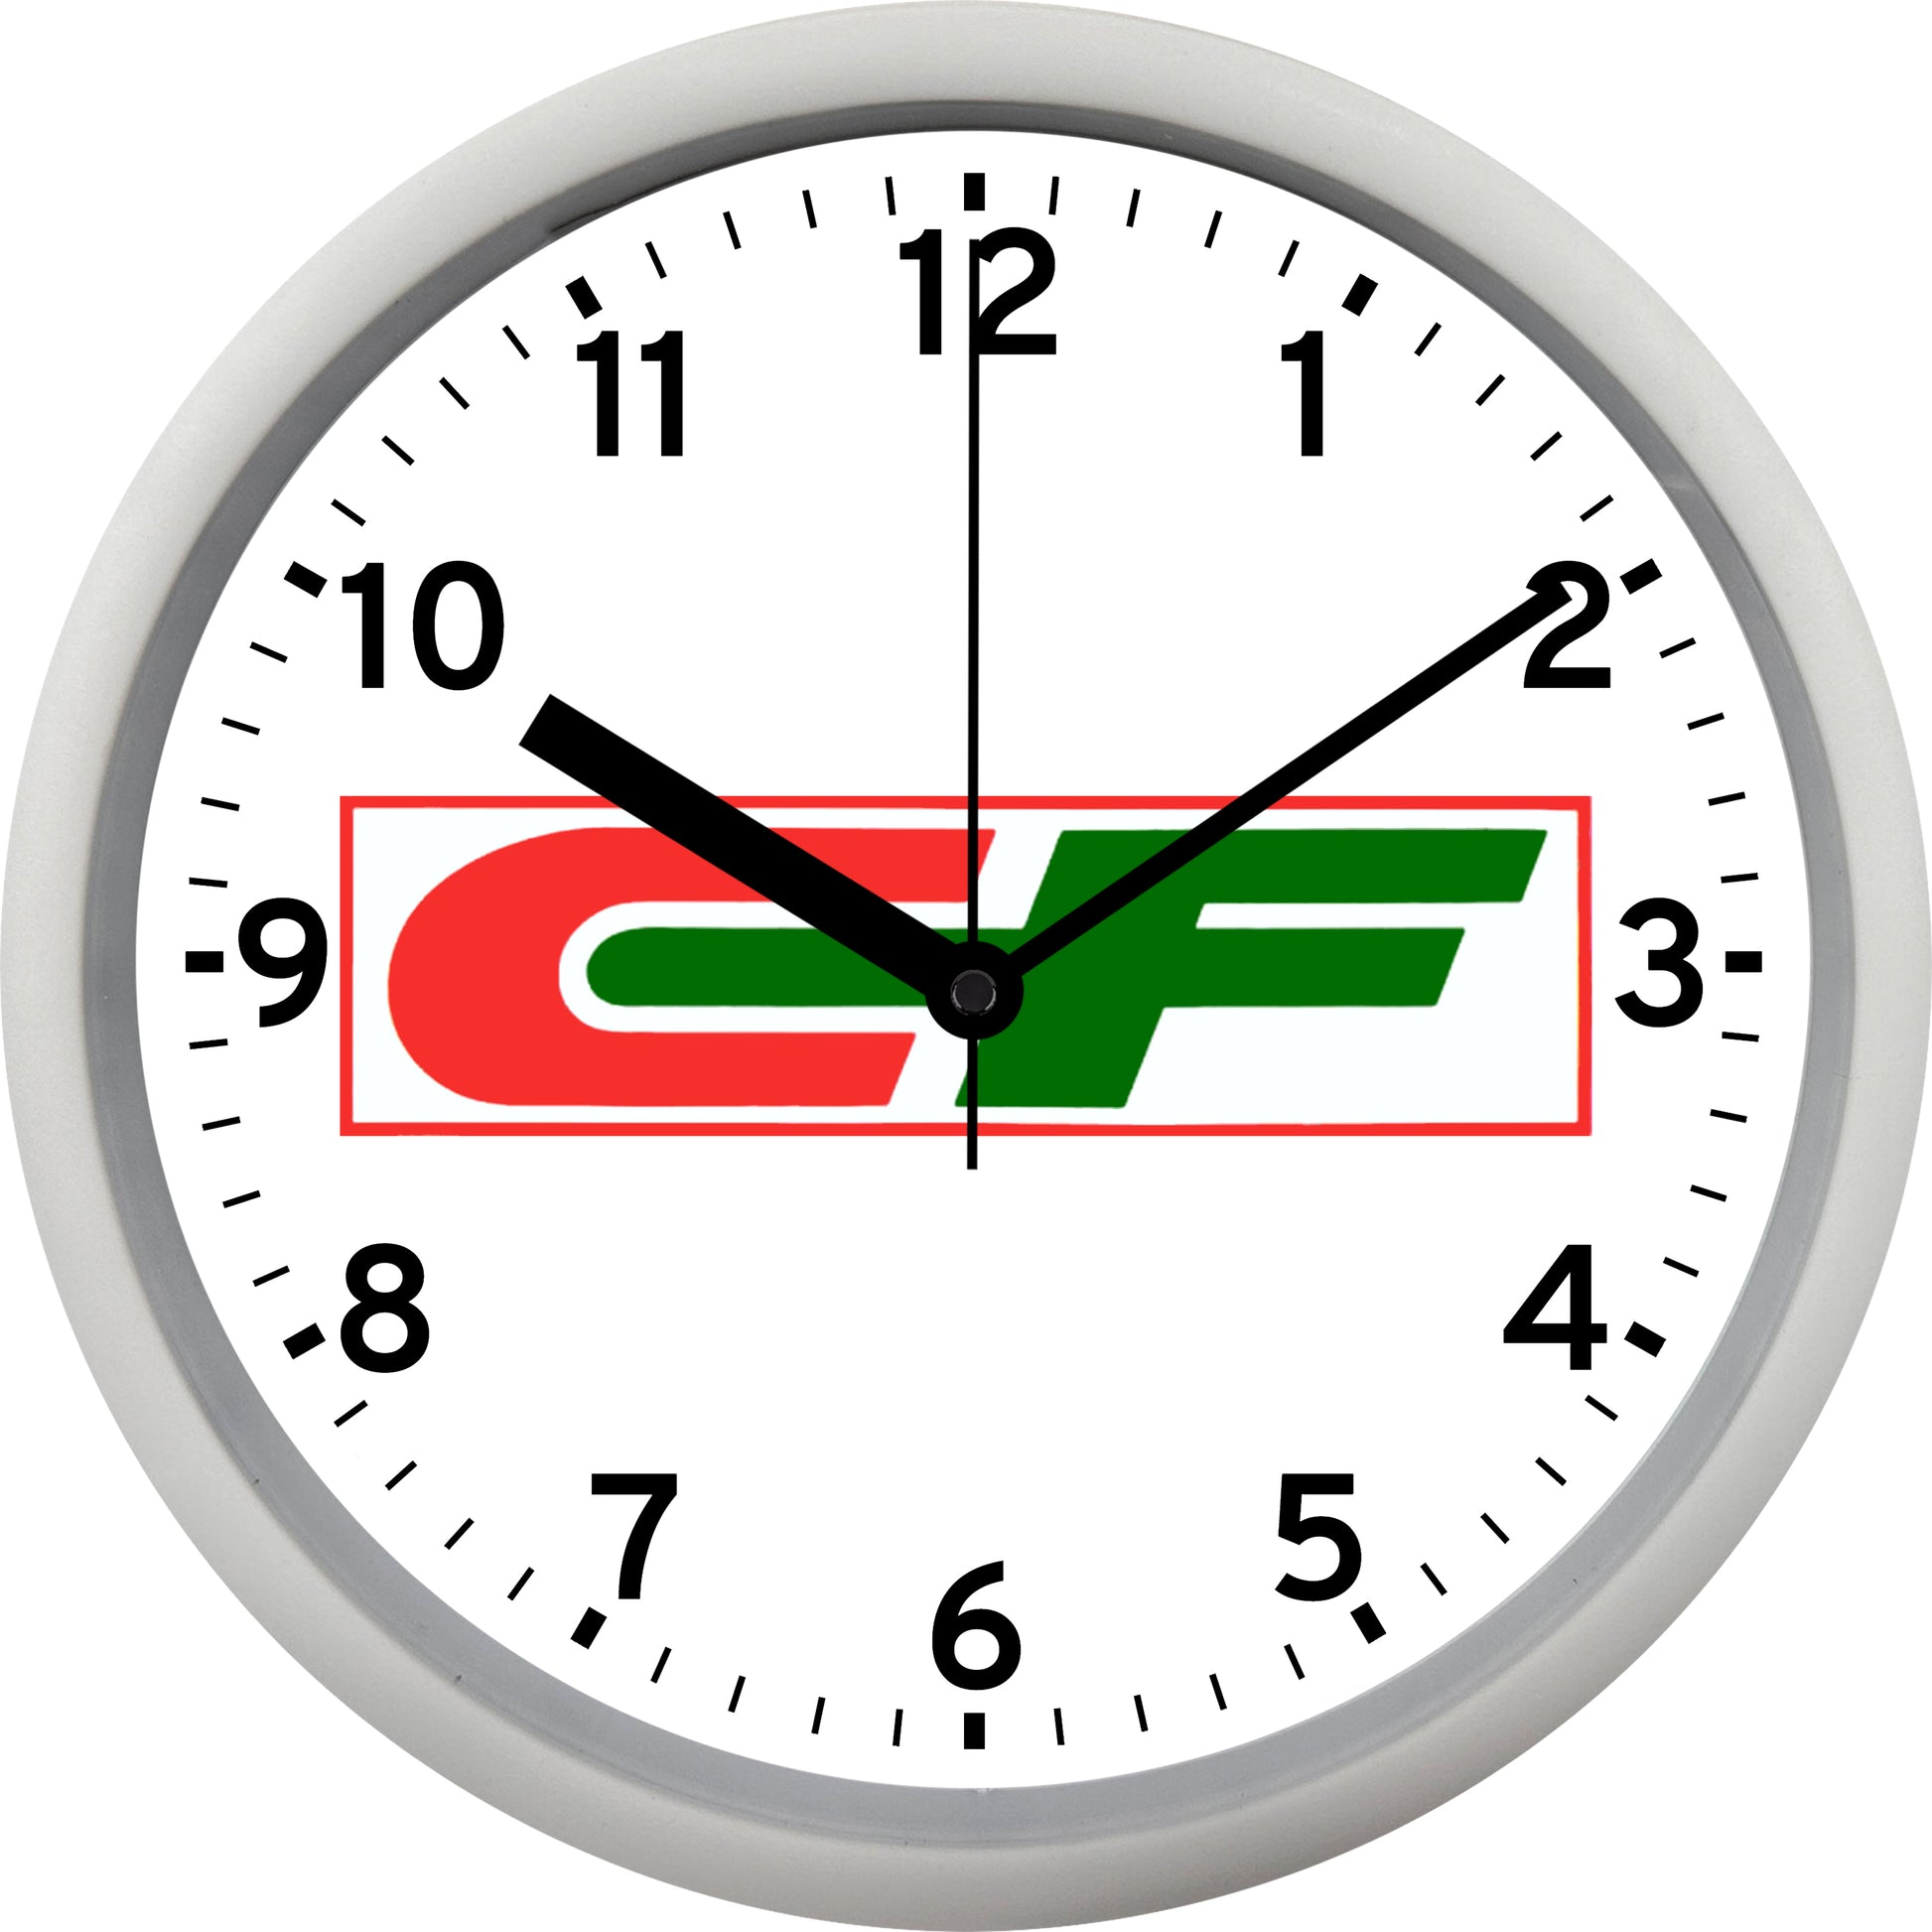 Consolidated Freightways - "CF" Wall Clock